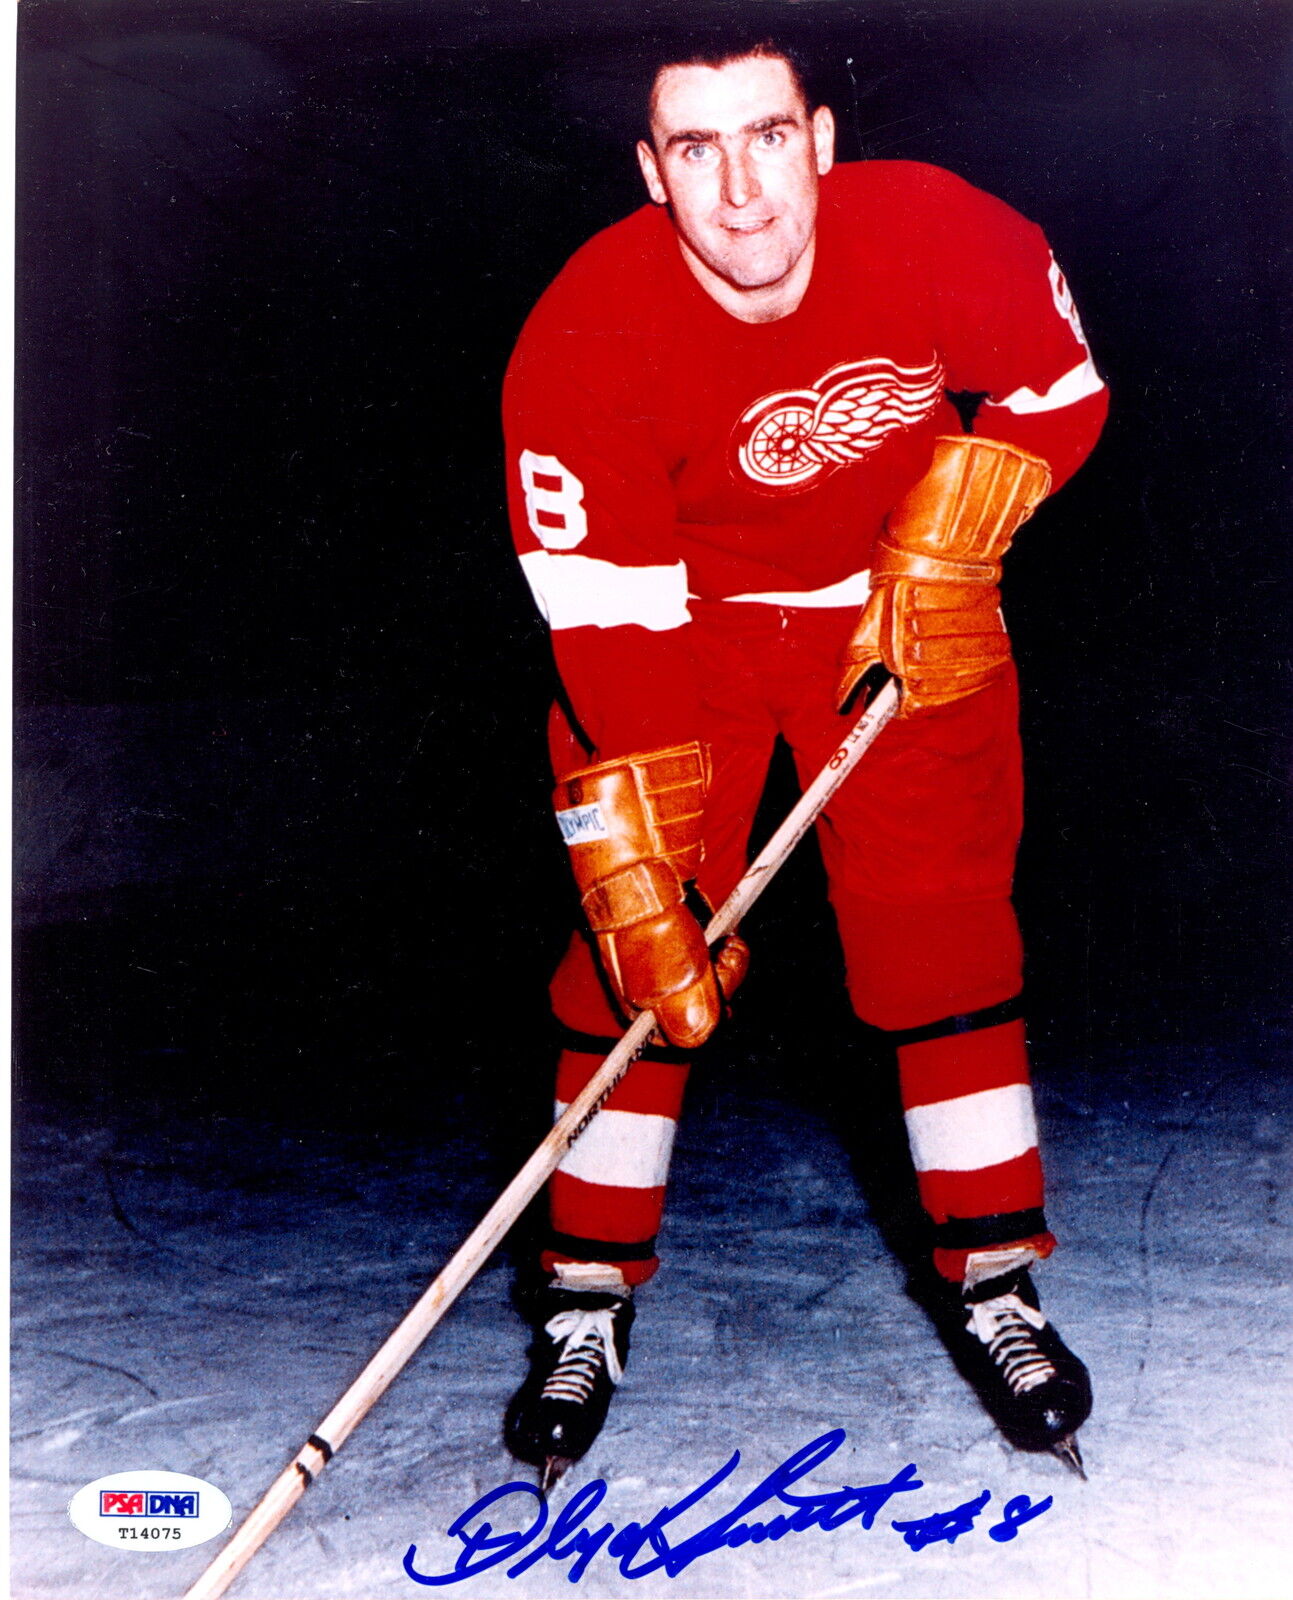 FLOYD SMITH DETROIT RED WINGS AUTOGRAPH AUTO SIGNED 8X10 Photo Poster painting PSA DNA COA